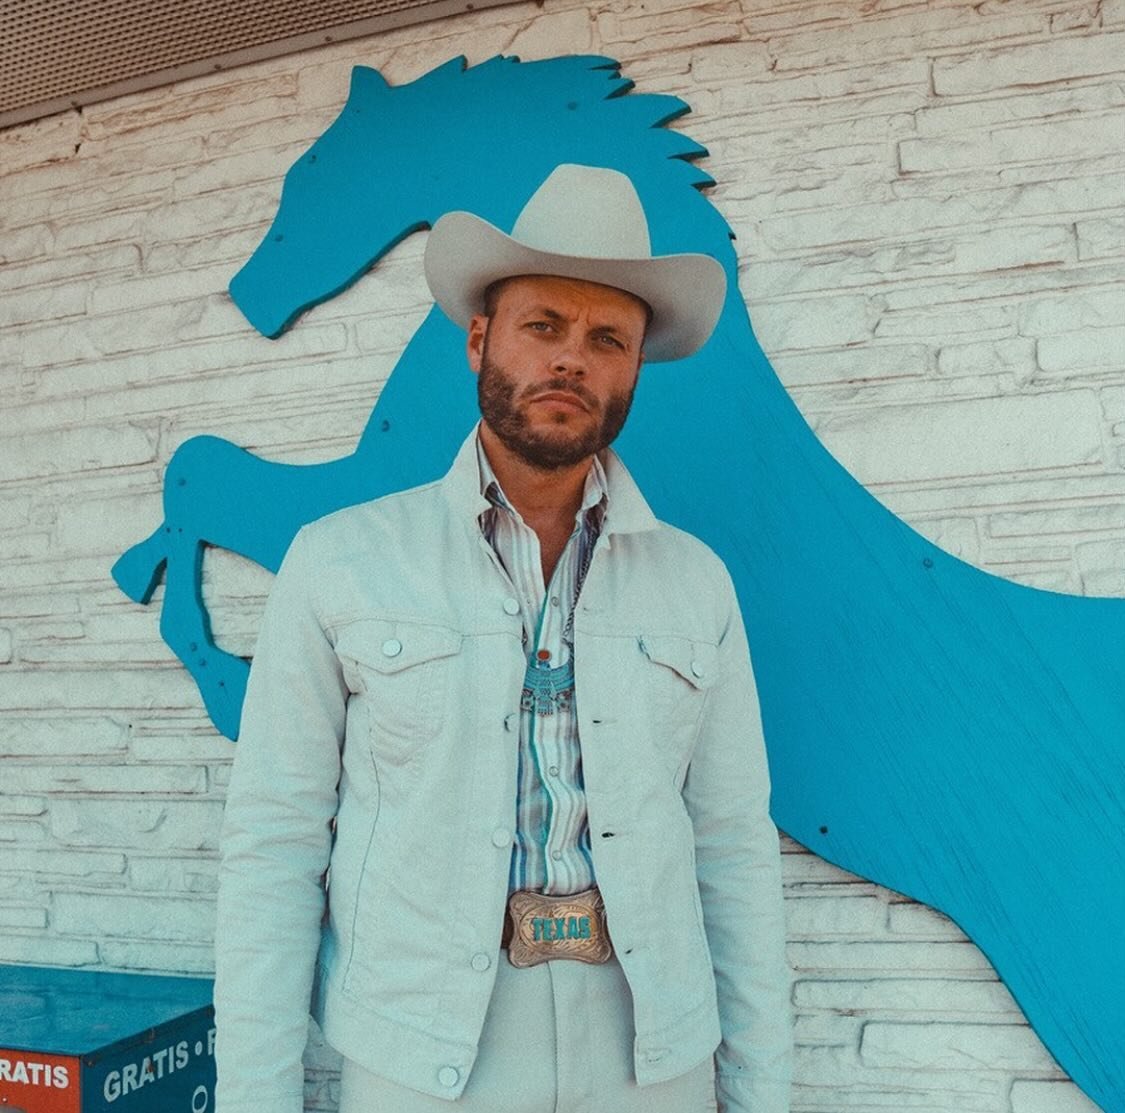 ON SALE NOW @charleycrockett, &lsquo;$10 Cowboy Tour&rsquo;. June 15th, 6pm-11pm on the Scout + Gather grounds!  Buy your tickets via @outriderspresent &gt;&gt;&gt; link in bio